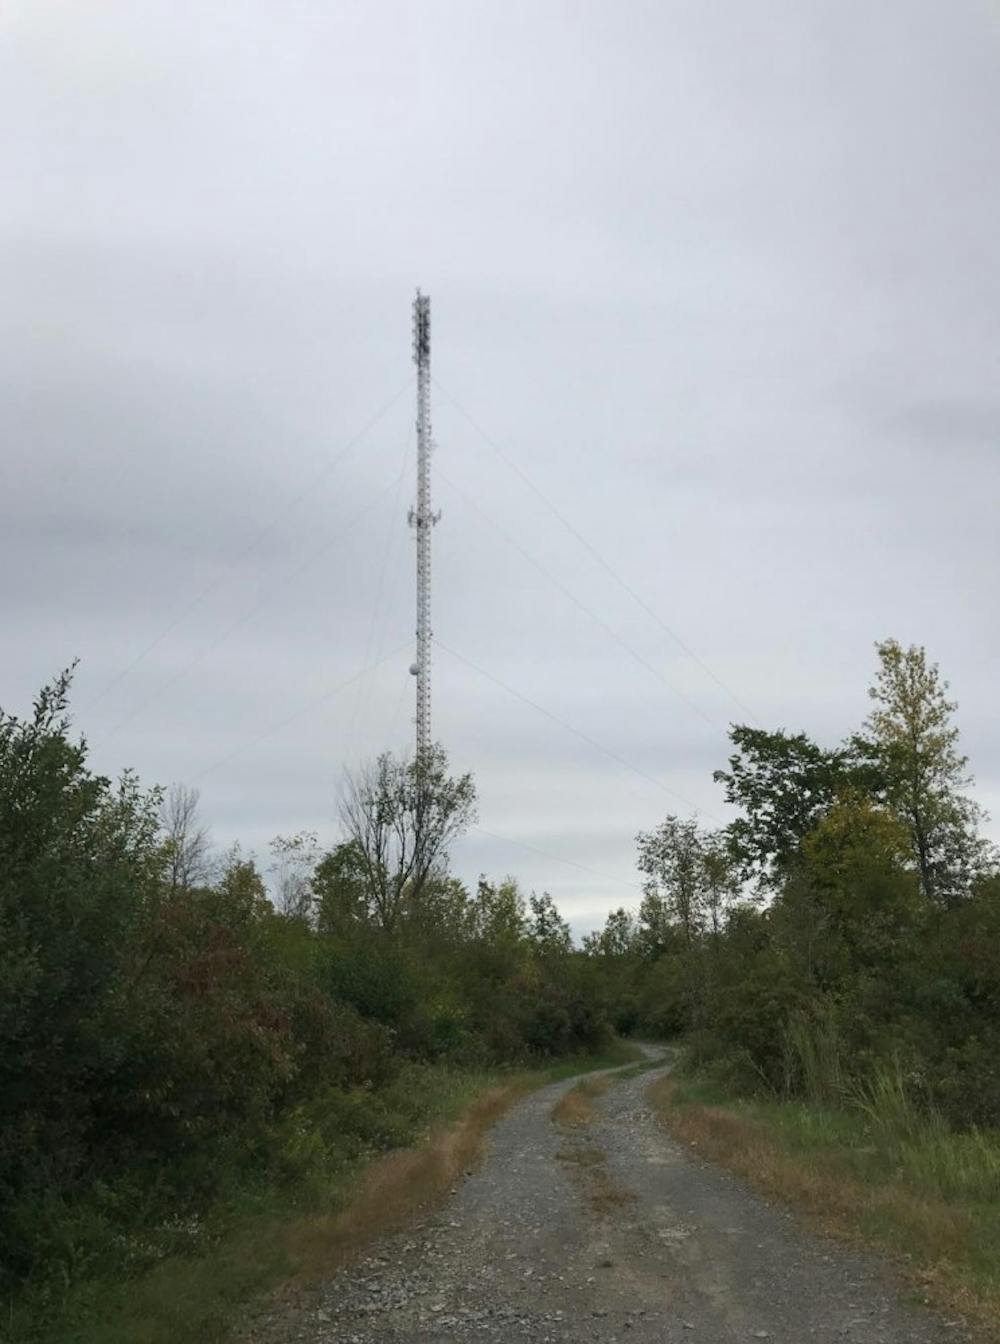 <p>UB’s radio tower, adjacent to the Millersport Highway, stands over 400-feet high. The tower hosts six tenants from around Western New York, including WNED/WBFO, Verizon and Transwave Communications Systems.</p>